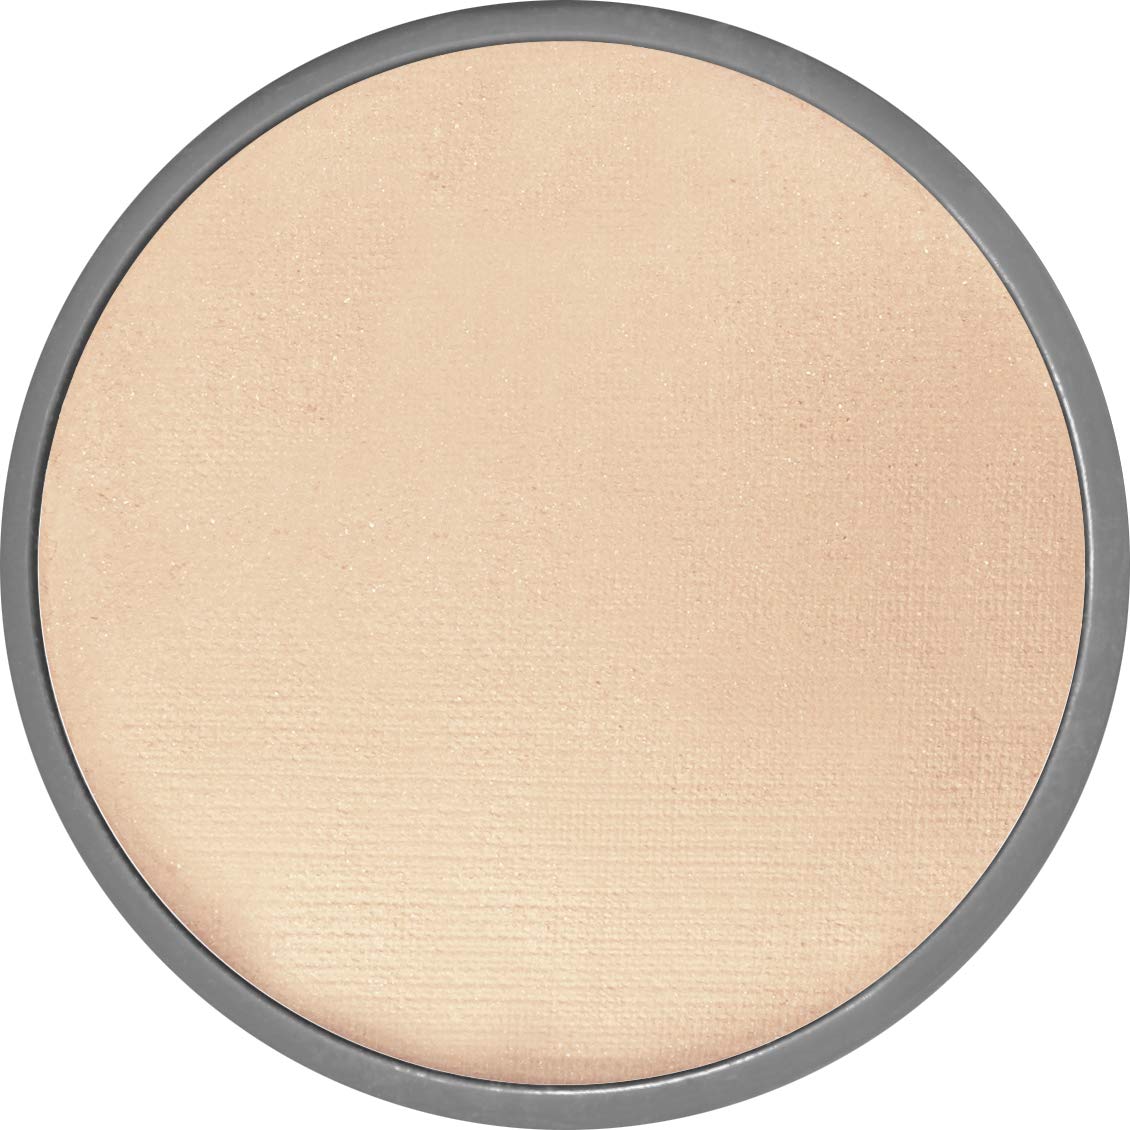 Lauren Brooke Cosmetiques Pressed Foundation, Natural and Organic Makeup (Cool No. 20)